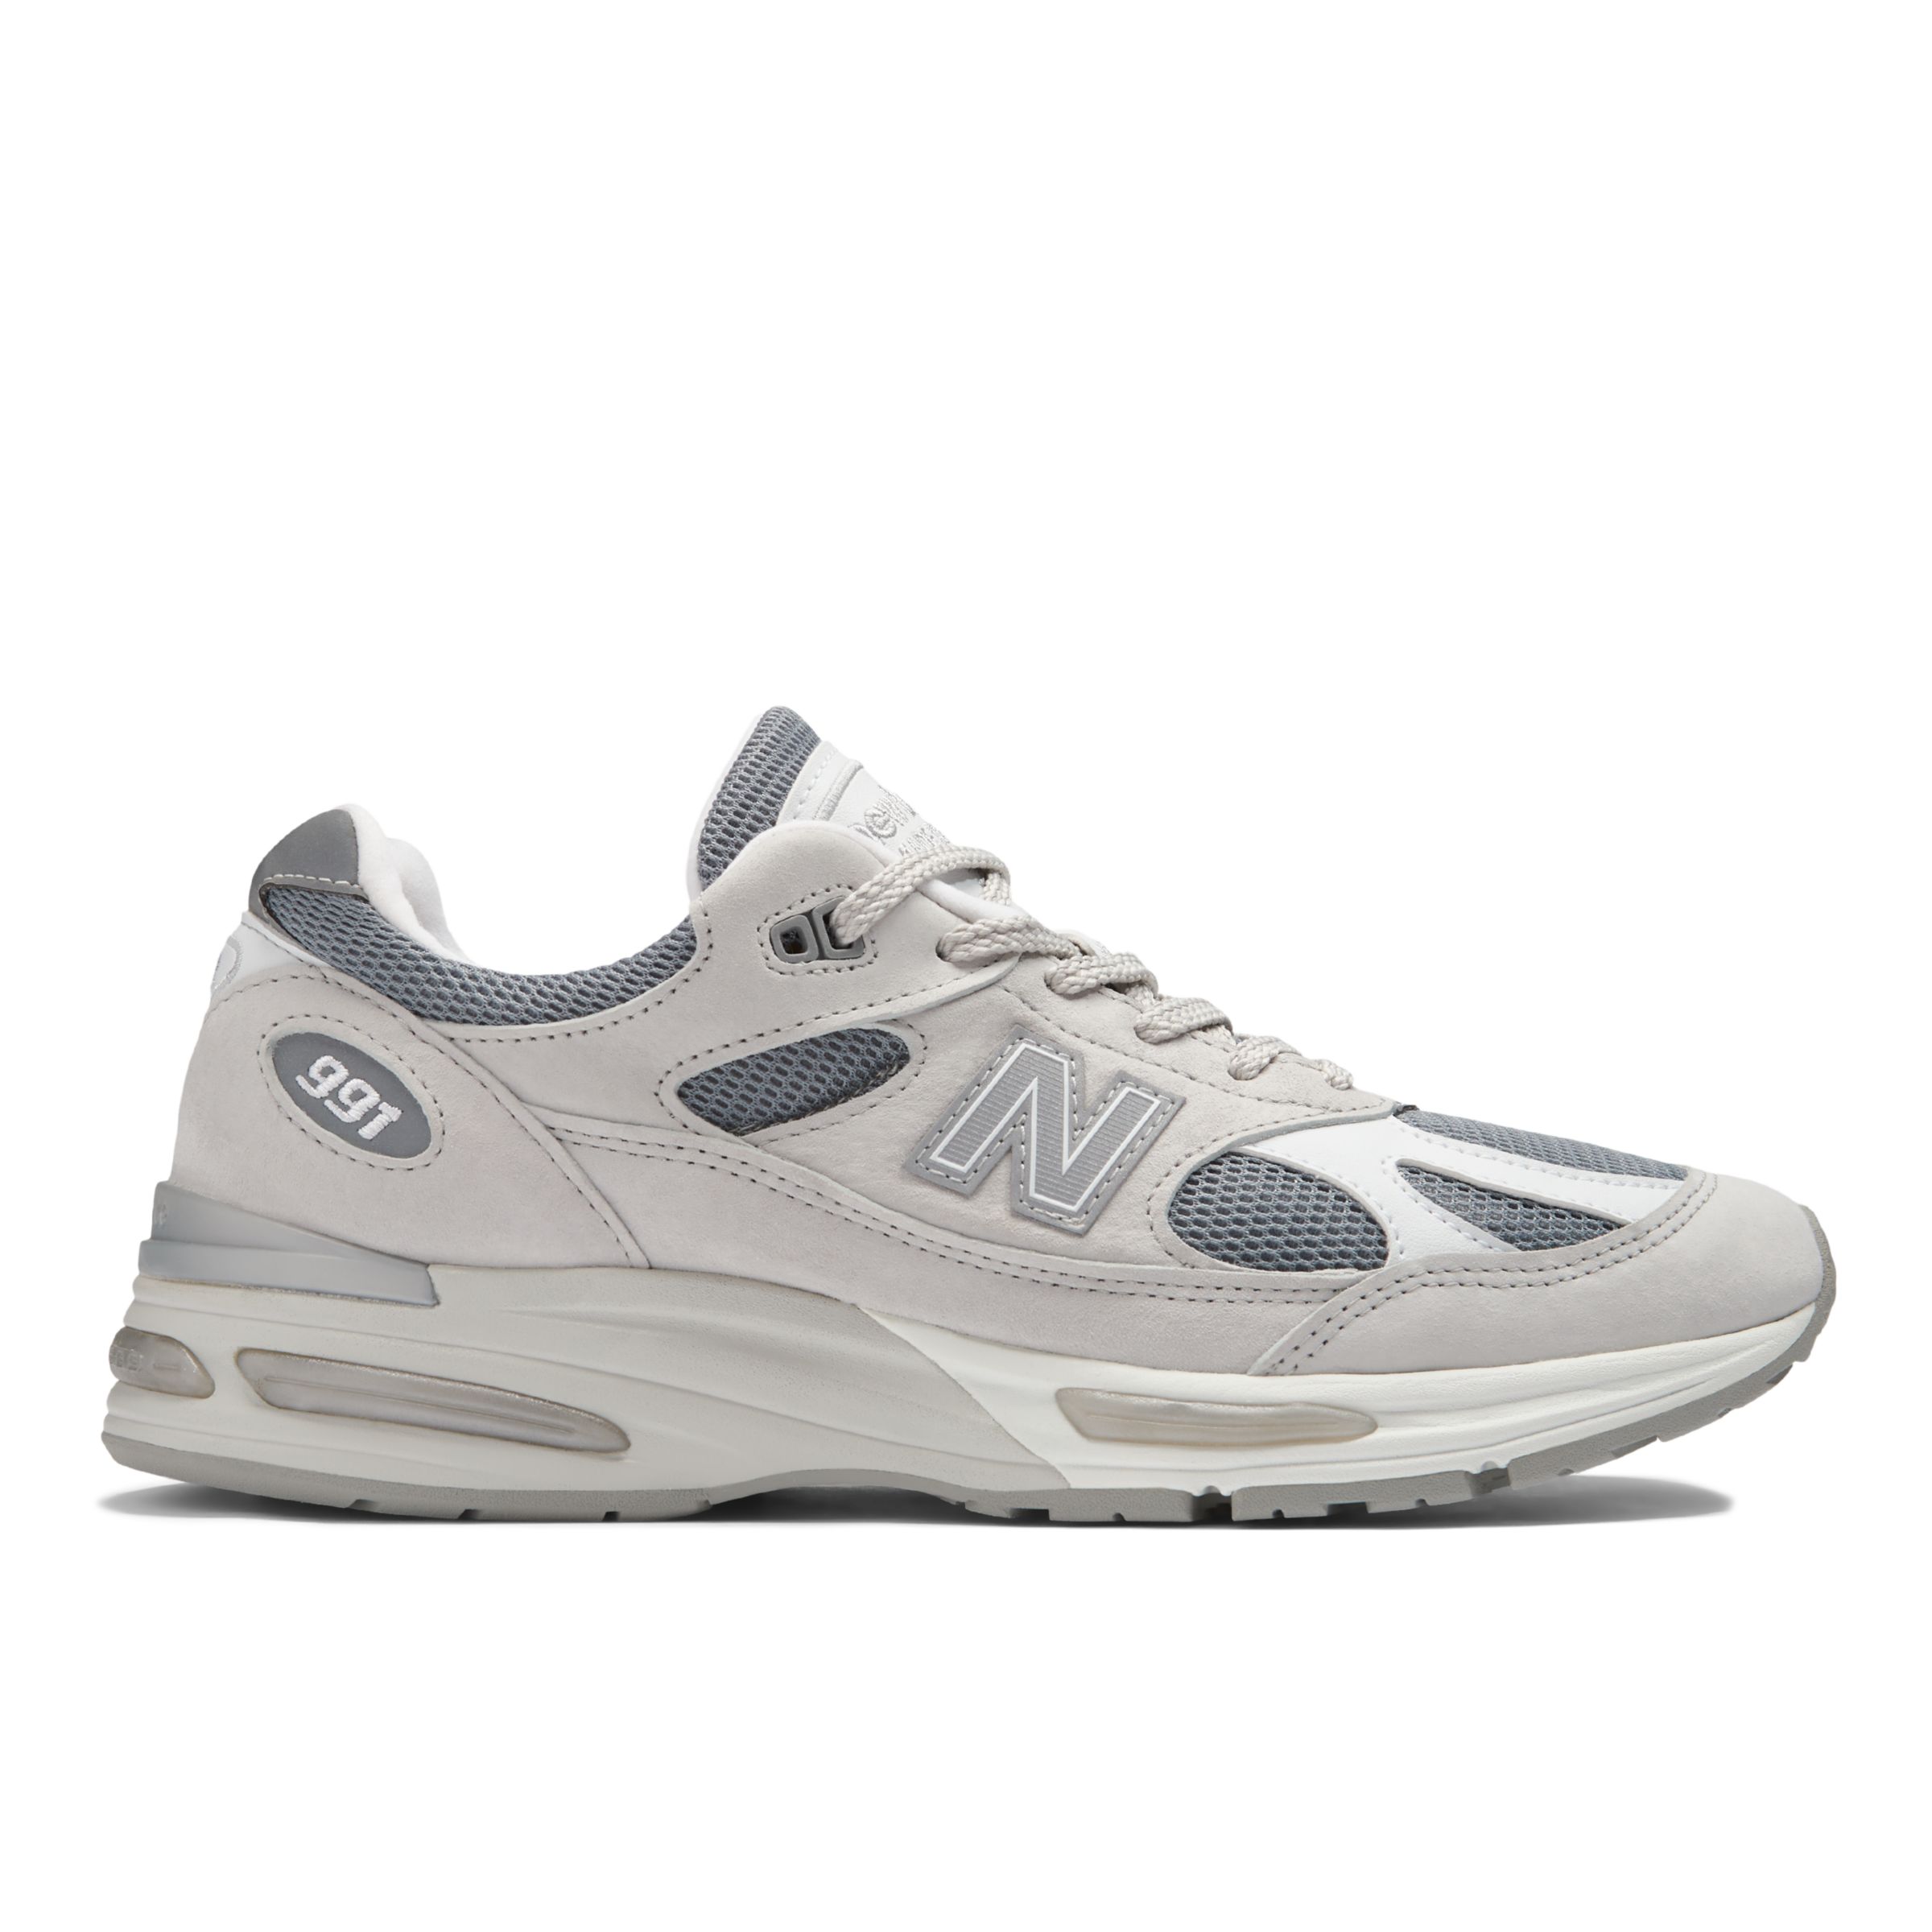 New Balance Unisexe MADE in UK 991v2 en Gris/Blanc, Suede/Mesh, Taille 45.5 Large